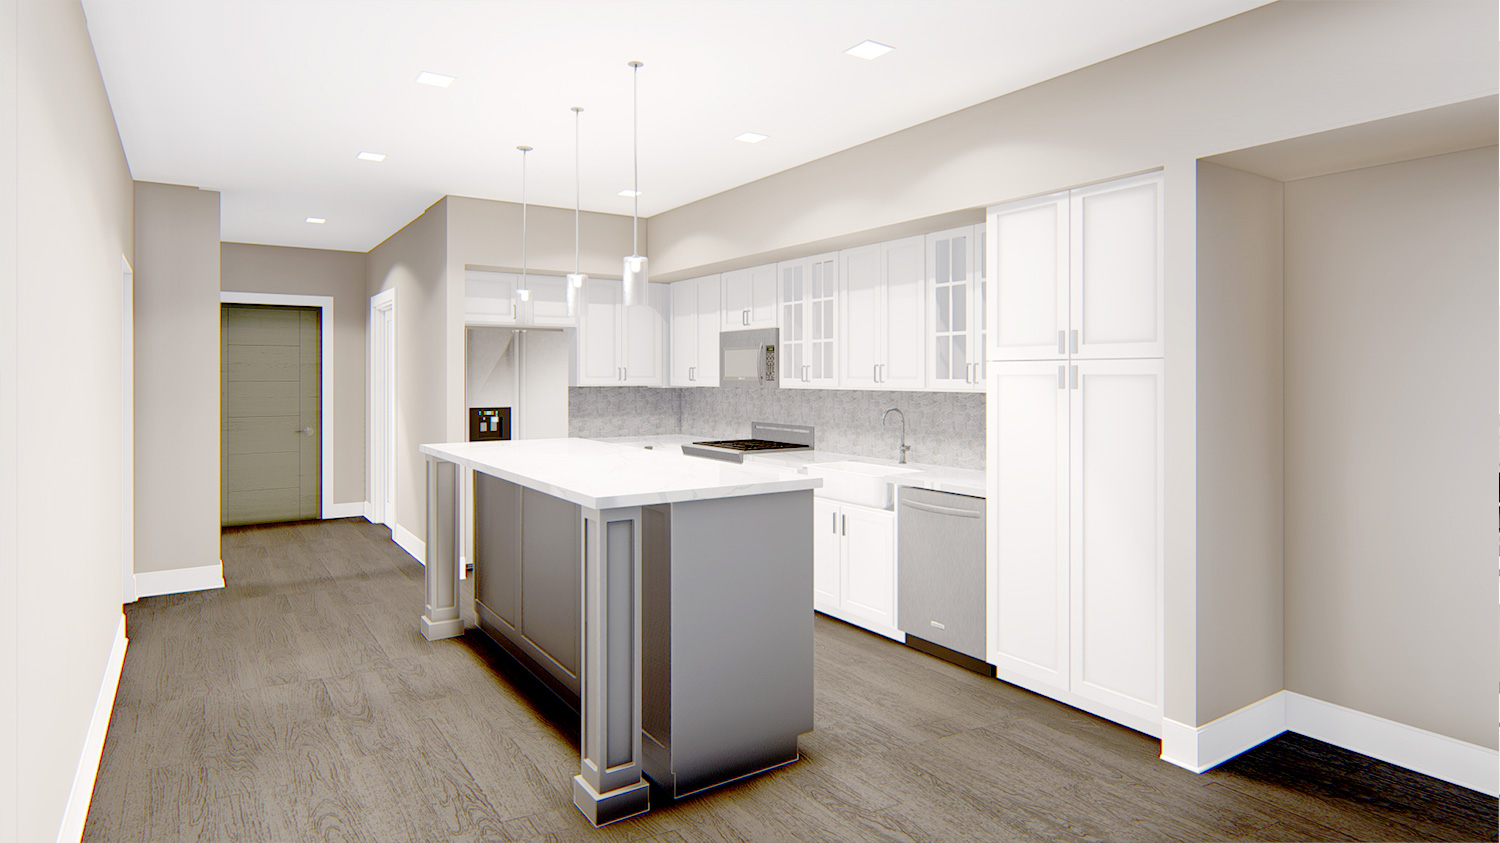 Spacious apartment kitchen in Royal Oak, MI with center island, stainless steel appliances, and recessed lighting